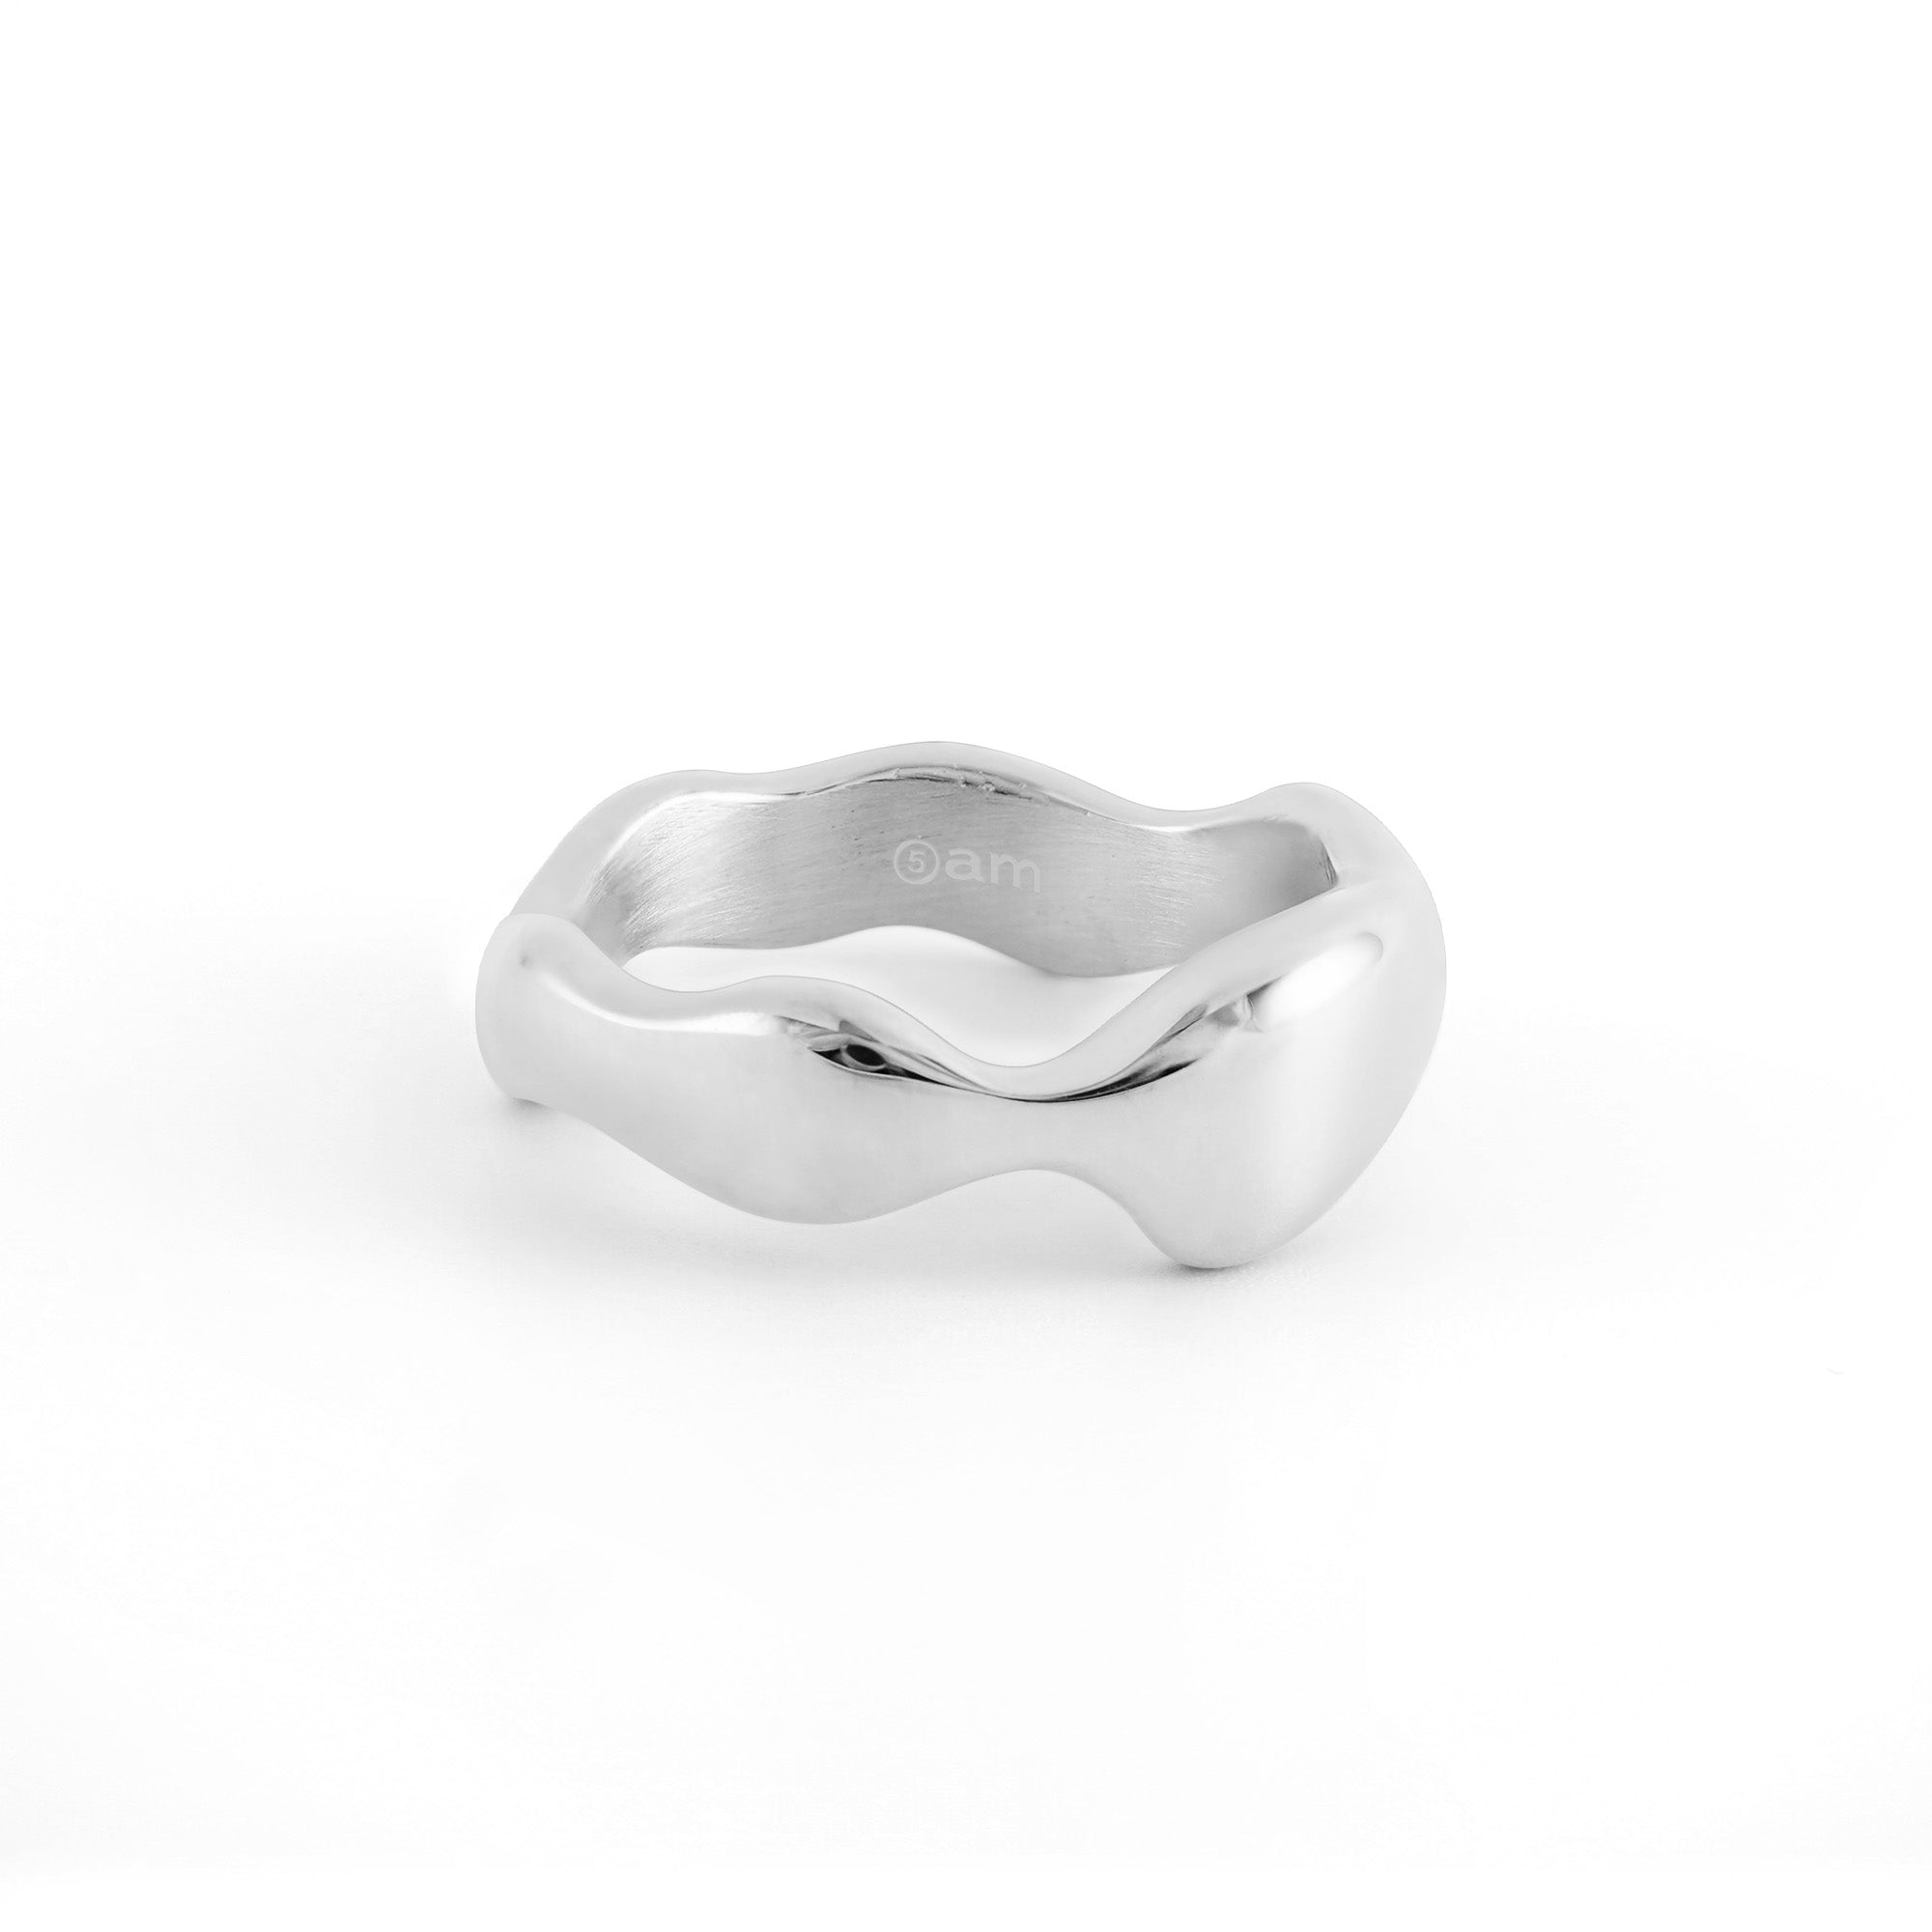 Dawn women's ring by Five Jwlry, a collaboration with Alicia Moffet, blending classic band style with the fluid elegance of a water droplet. Available in 14k gold or silver, this unique piece is crafted from water-resistant 316L stainless steel. Hypoallergenic with a 2-year warranty.